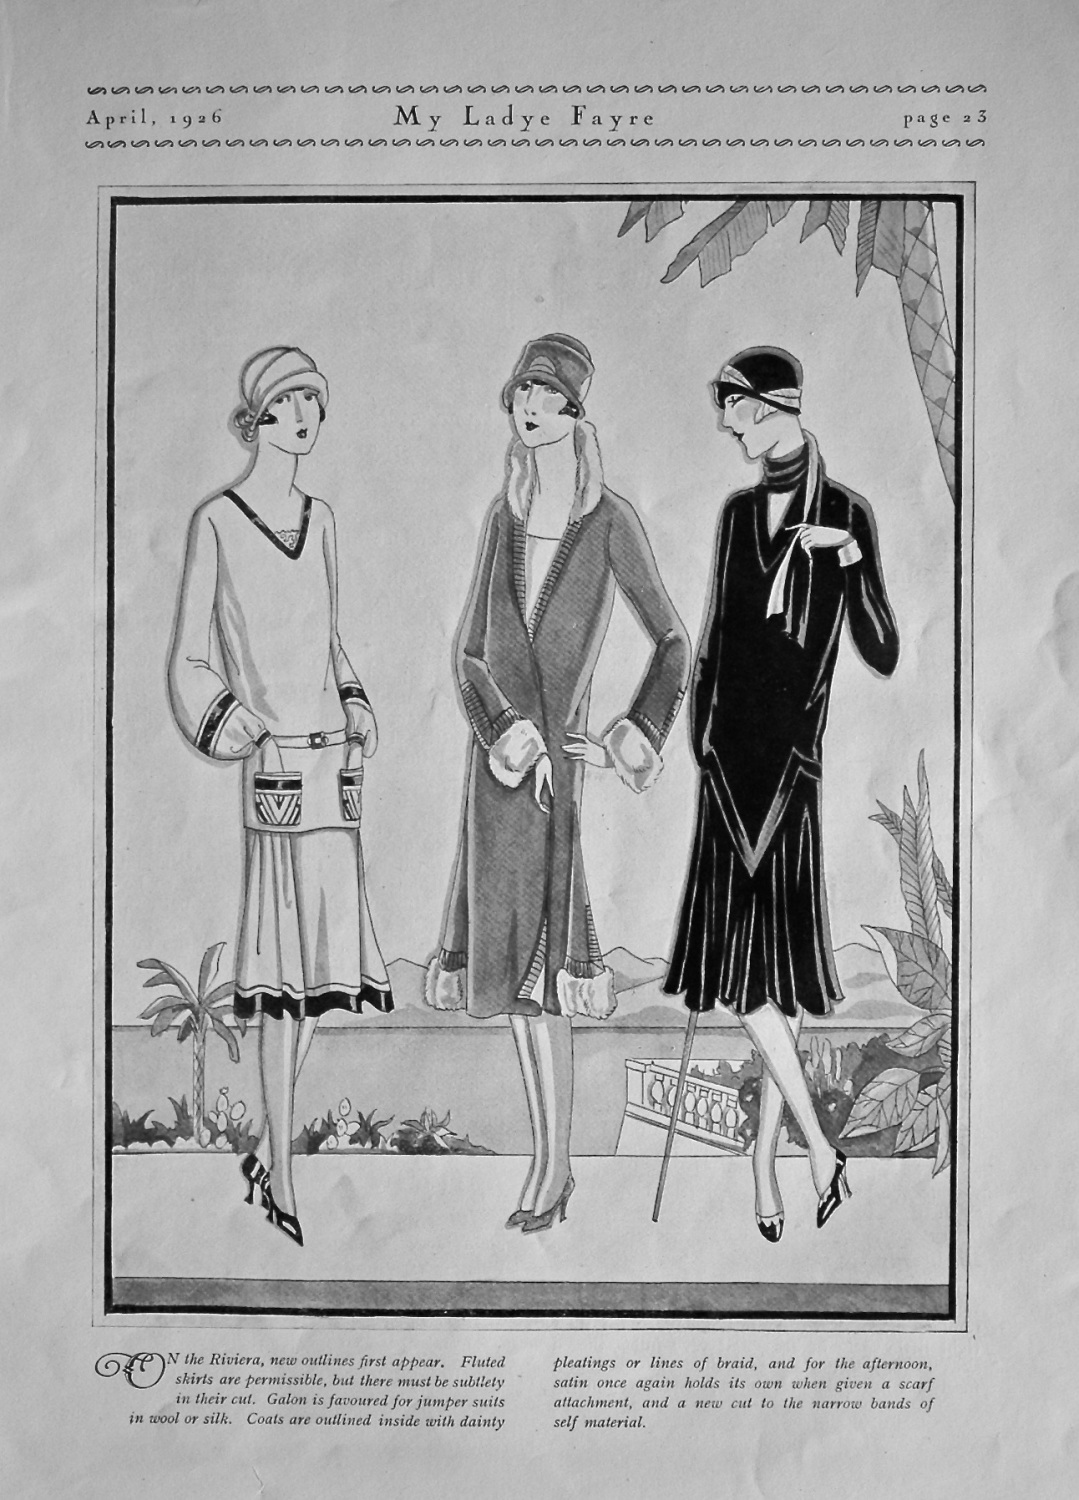 On the Riviera new outlines first appear. 1926